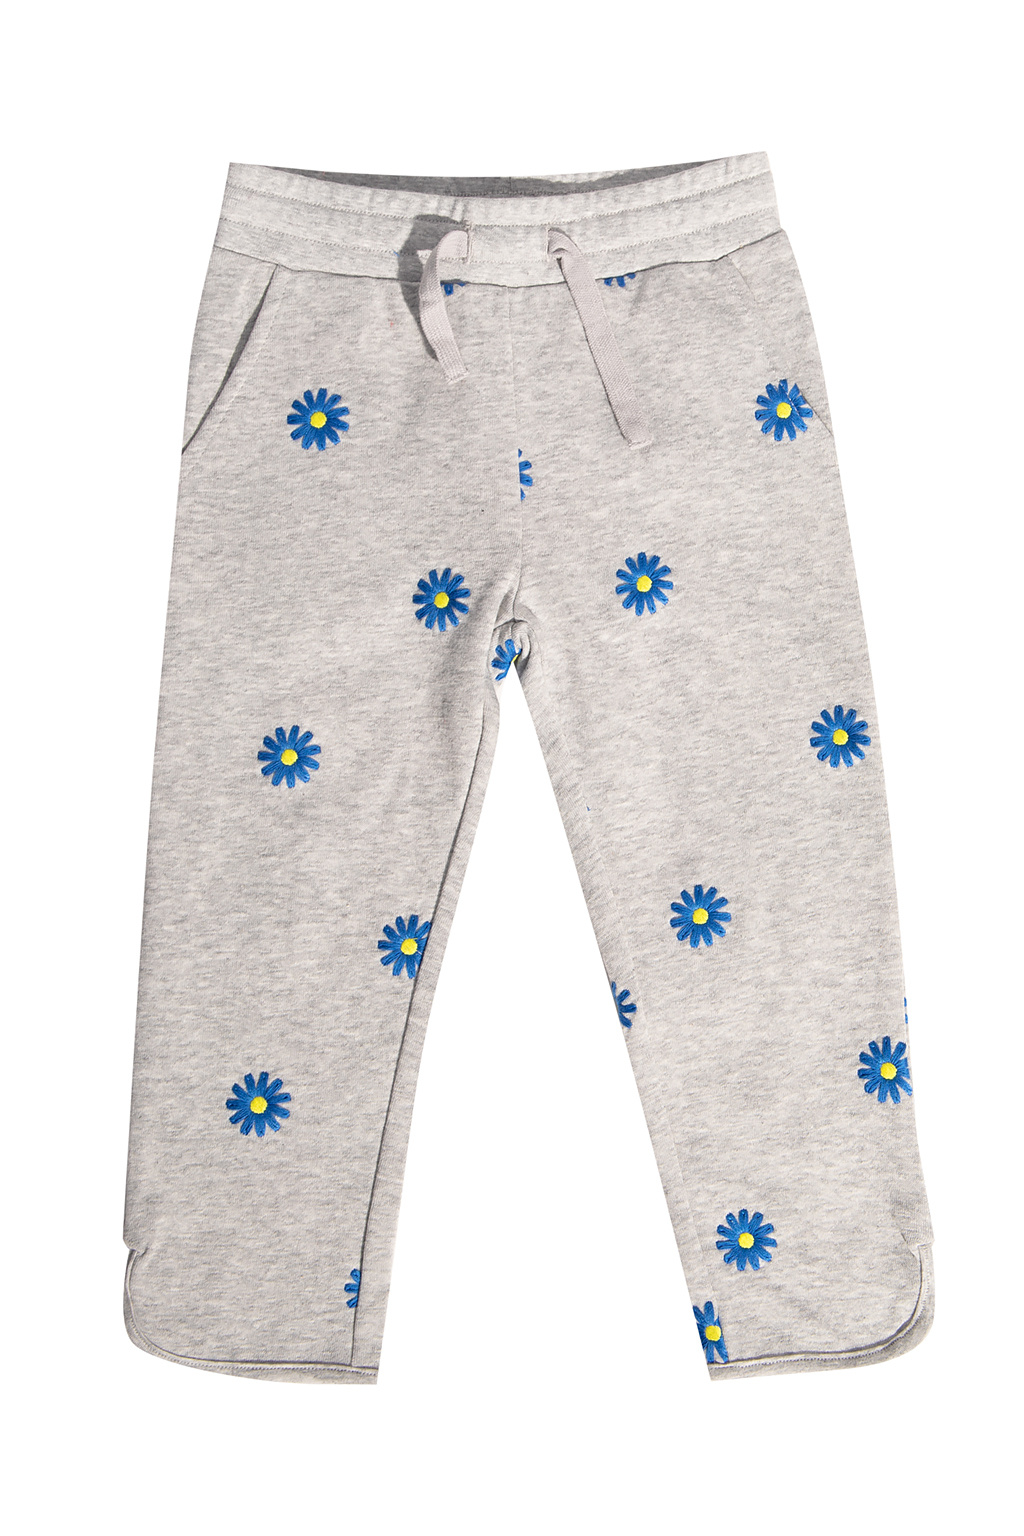 Stella McCartney Kids Floral-embroidered trousers